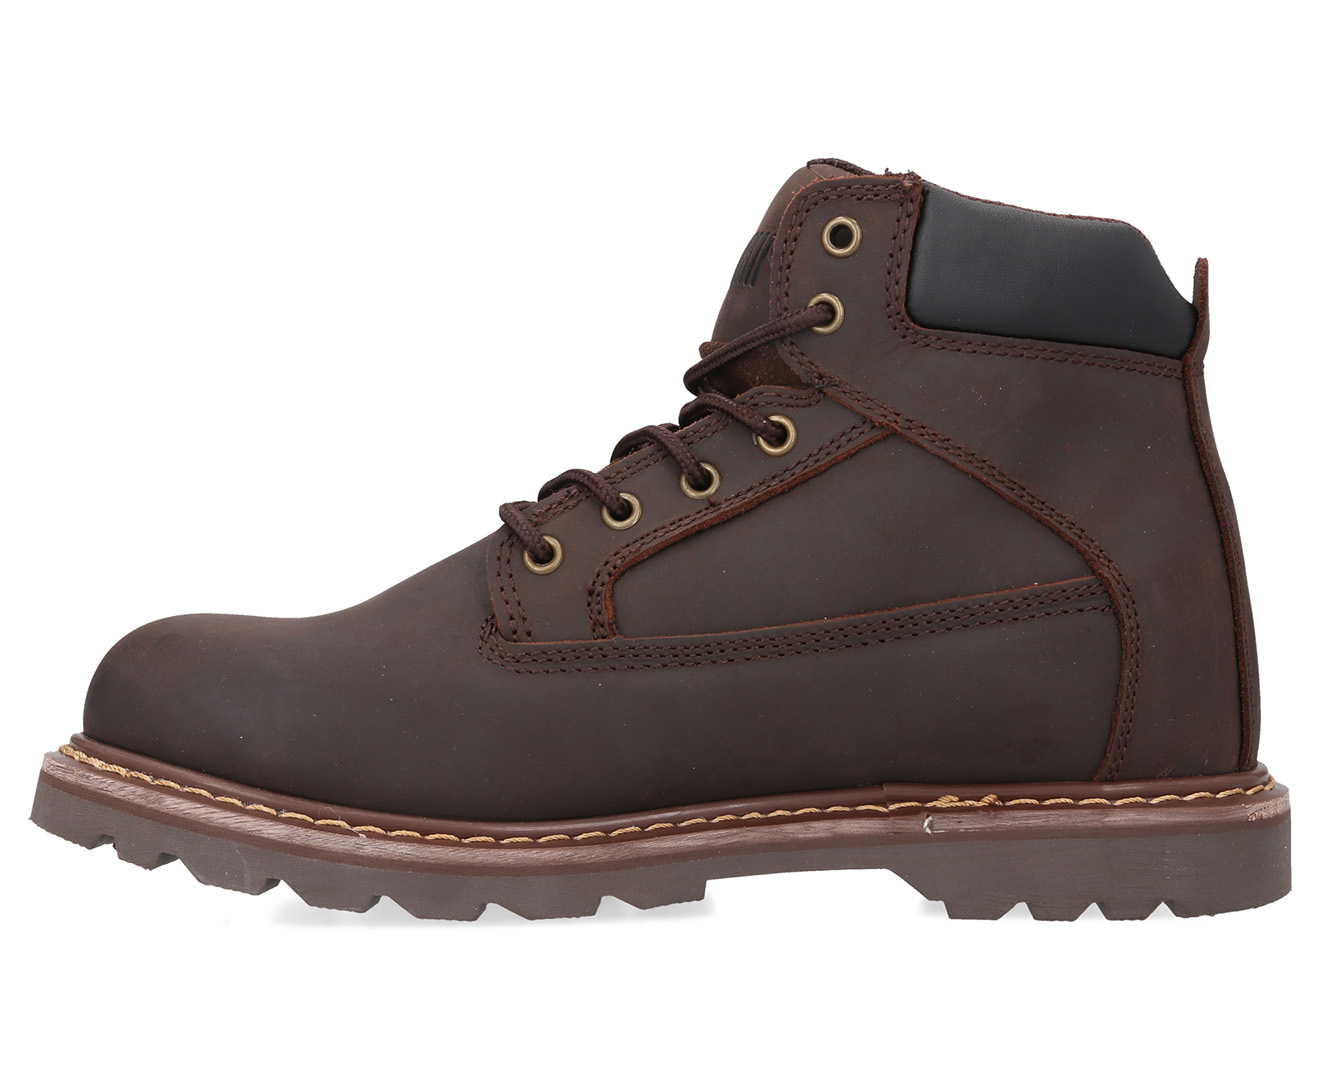 Jeep Men's Legacy Leather Hiking Boots - Chocolate | Catch.co.nz